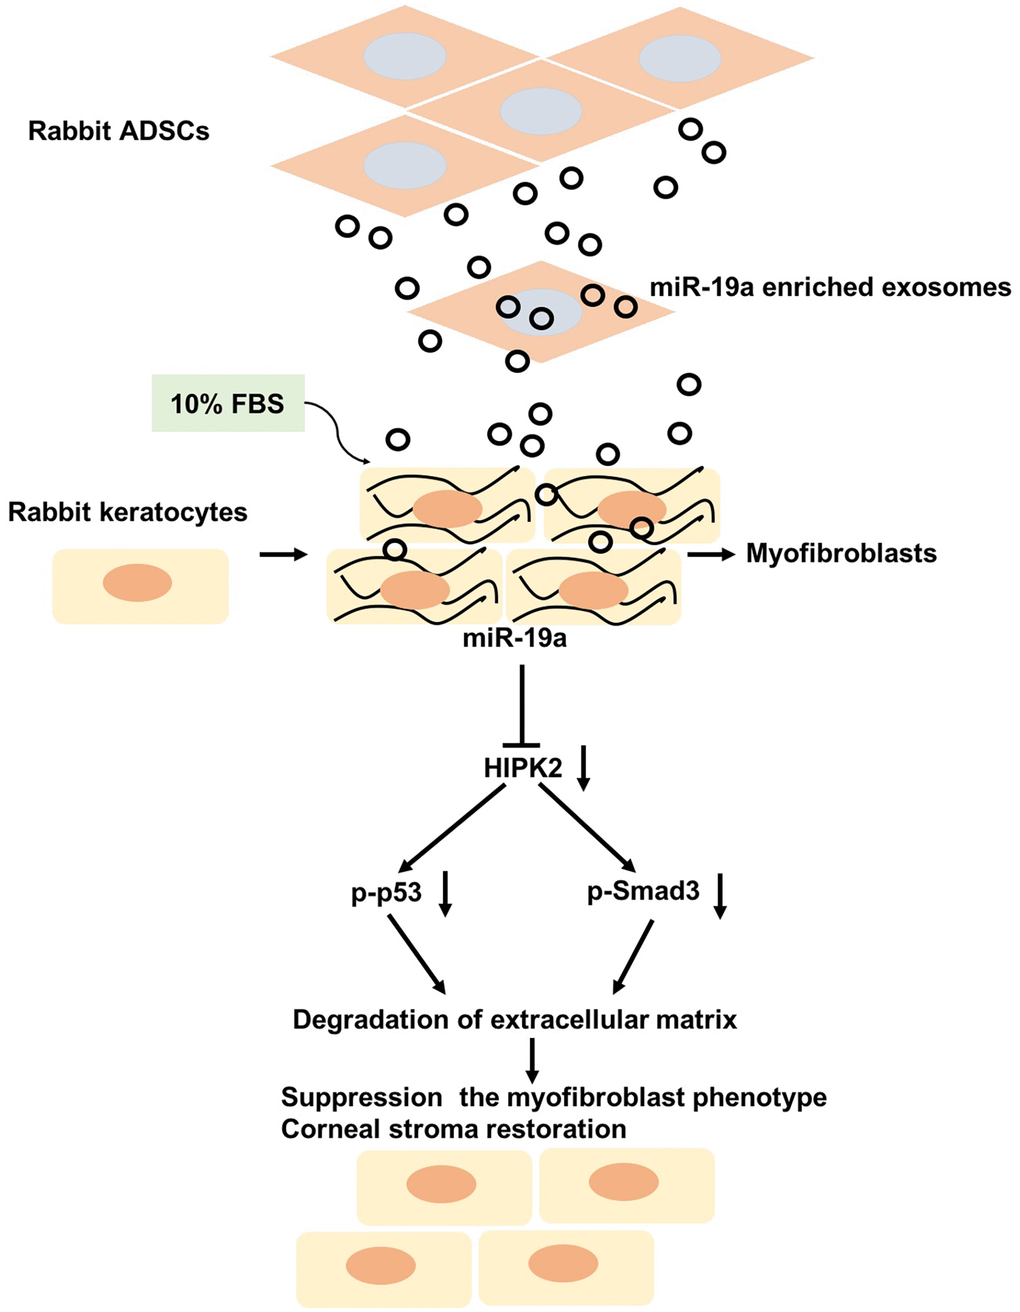 Putative mechanism by which ADSCs-Exo-miR-19a suppress the FBS-induced differentiation of rabbit corneal keratocytes into myofibroblasts. ADSCs-Exo-miR-19a suppresses FBS-induced differentiation of keratocytes into myofibroblasts by inhibiting HIPK2 expression. Reduced HIPK2 levels suppress the TGF-β/Smad3 and p53 signaling pathways, and reduce the expression of pro-fibrotic markers and ECM components. Overall, these events decrease cell viability and ECM degradation.